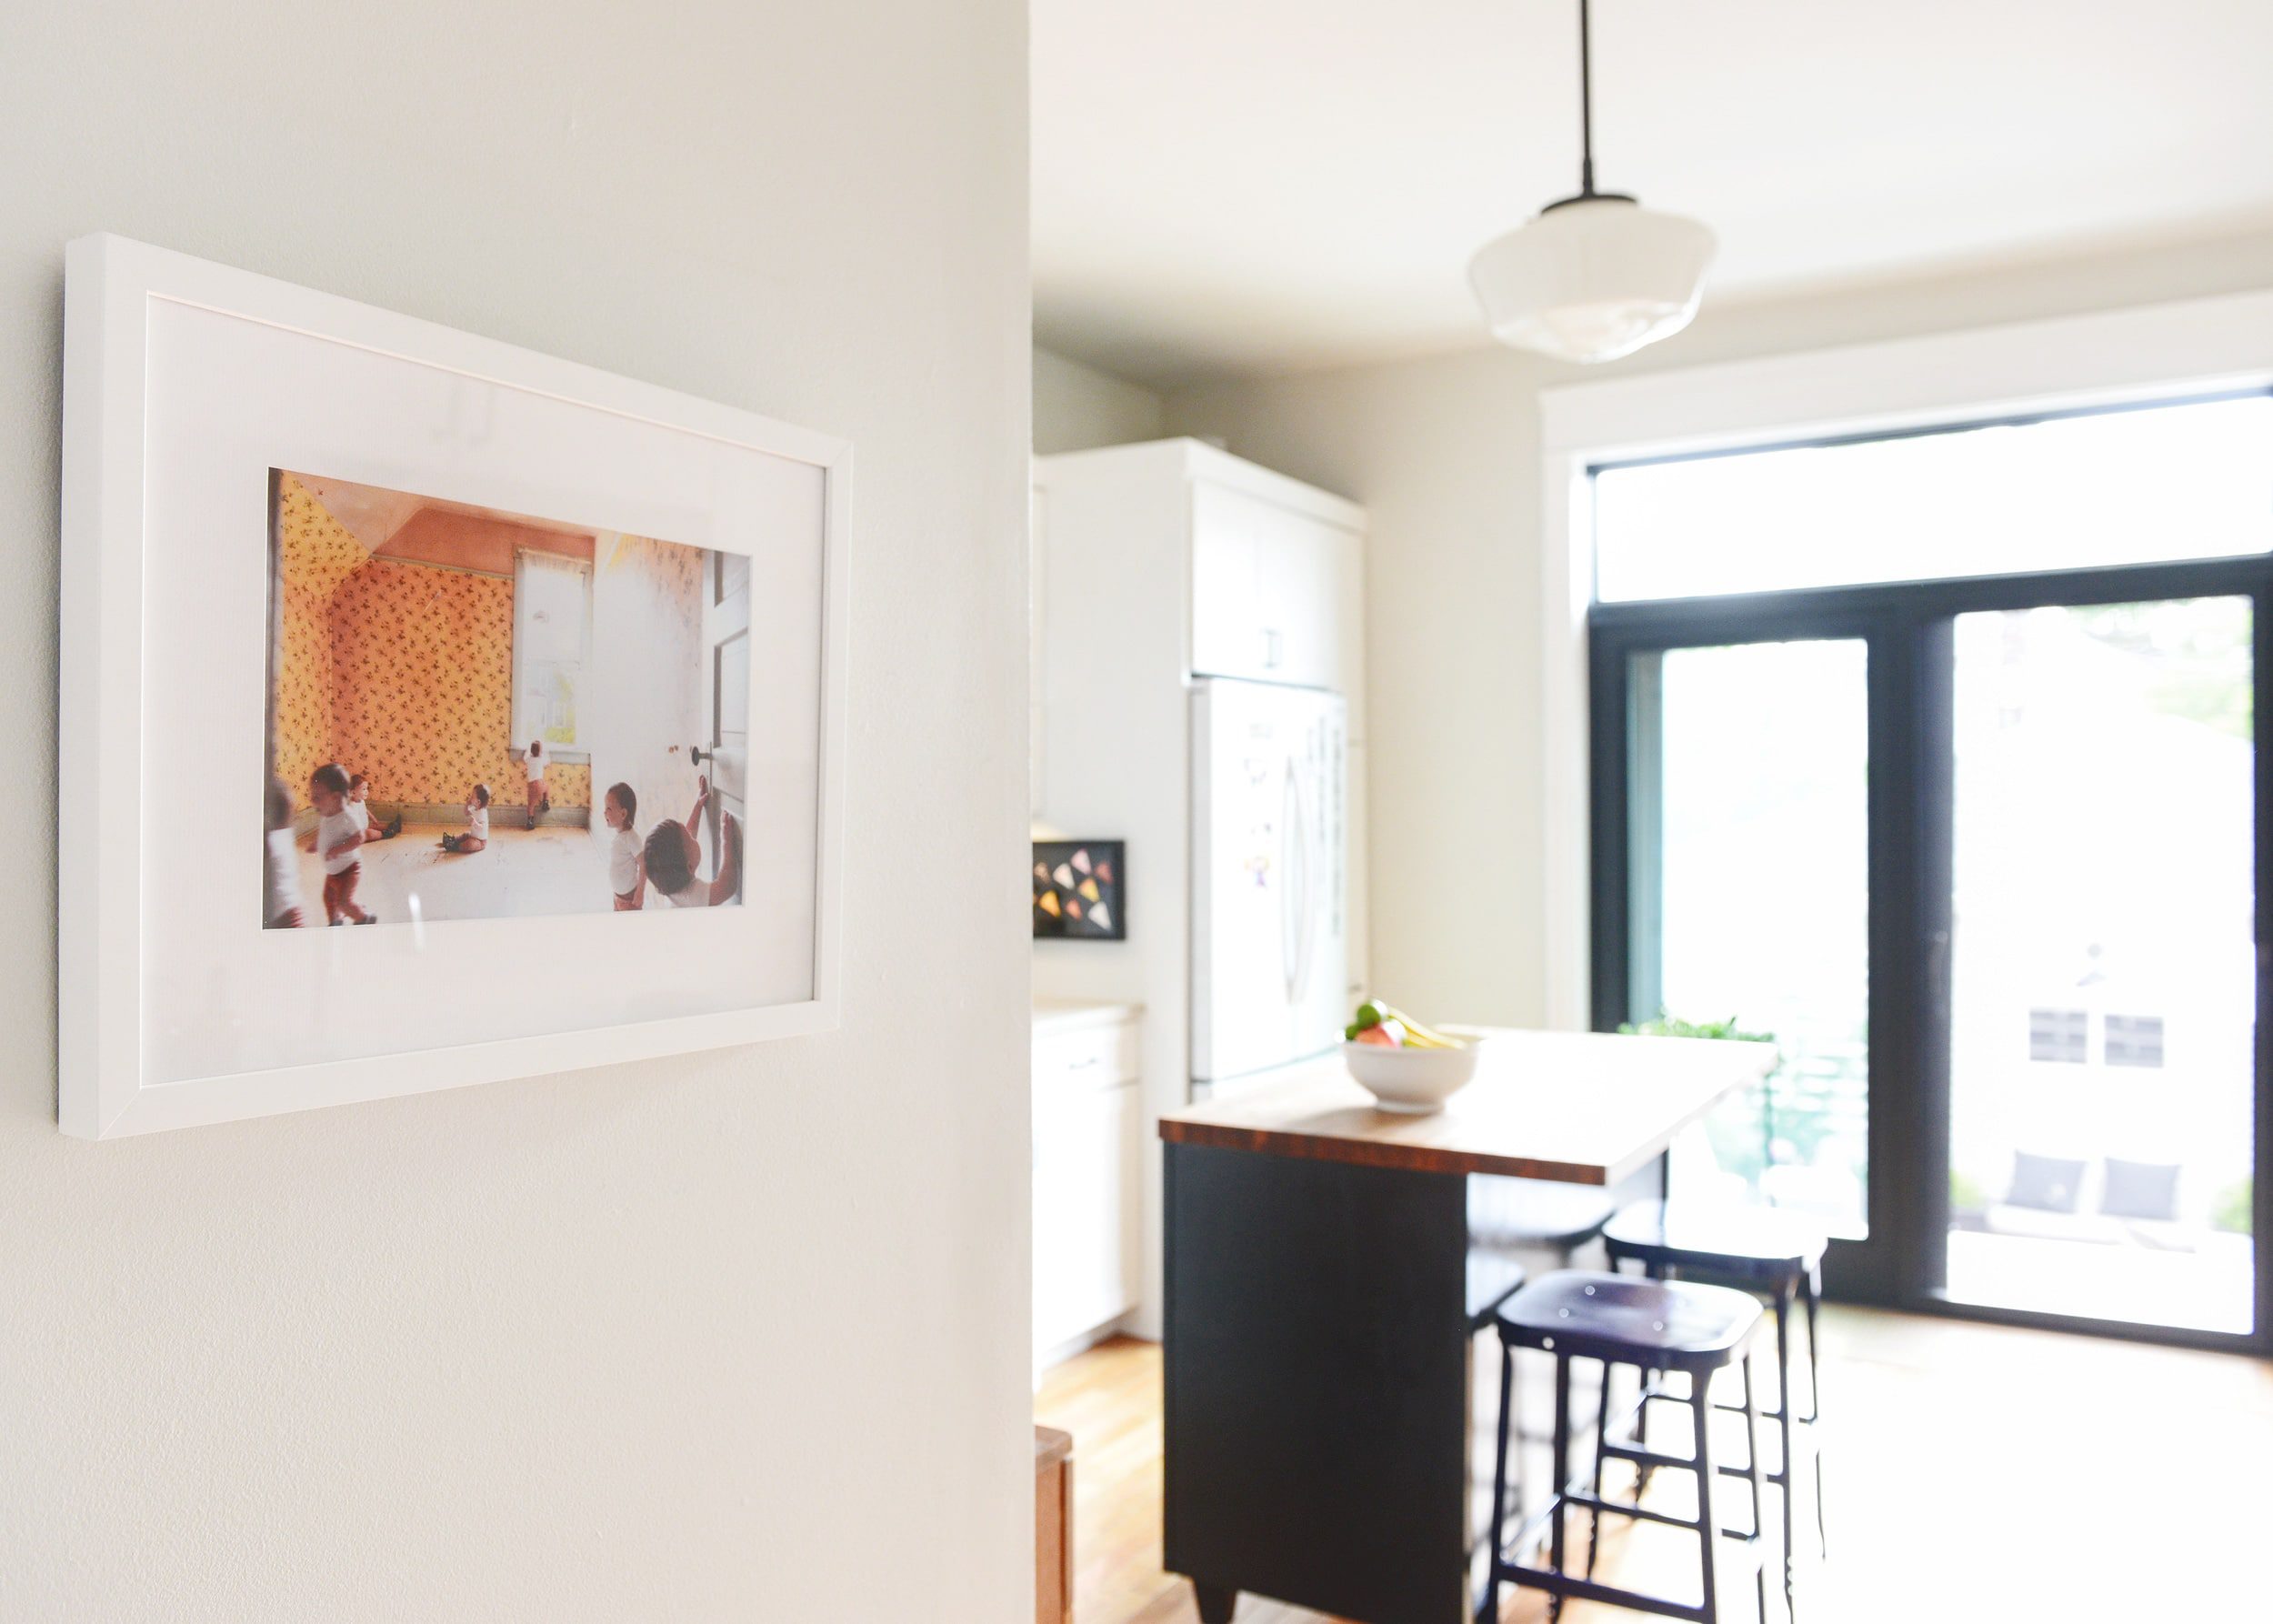 How To Create a Composite Photo by Stitching Multiple Images Together // via Yellow Brick Home